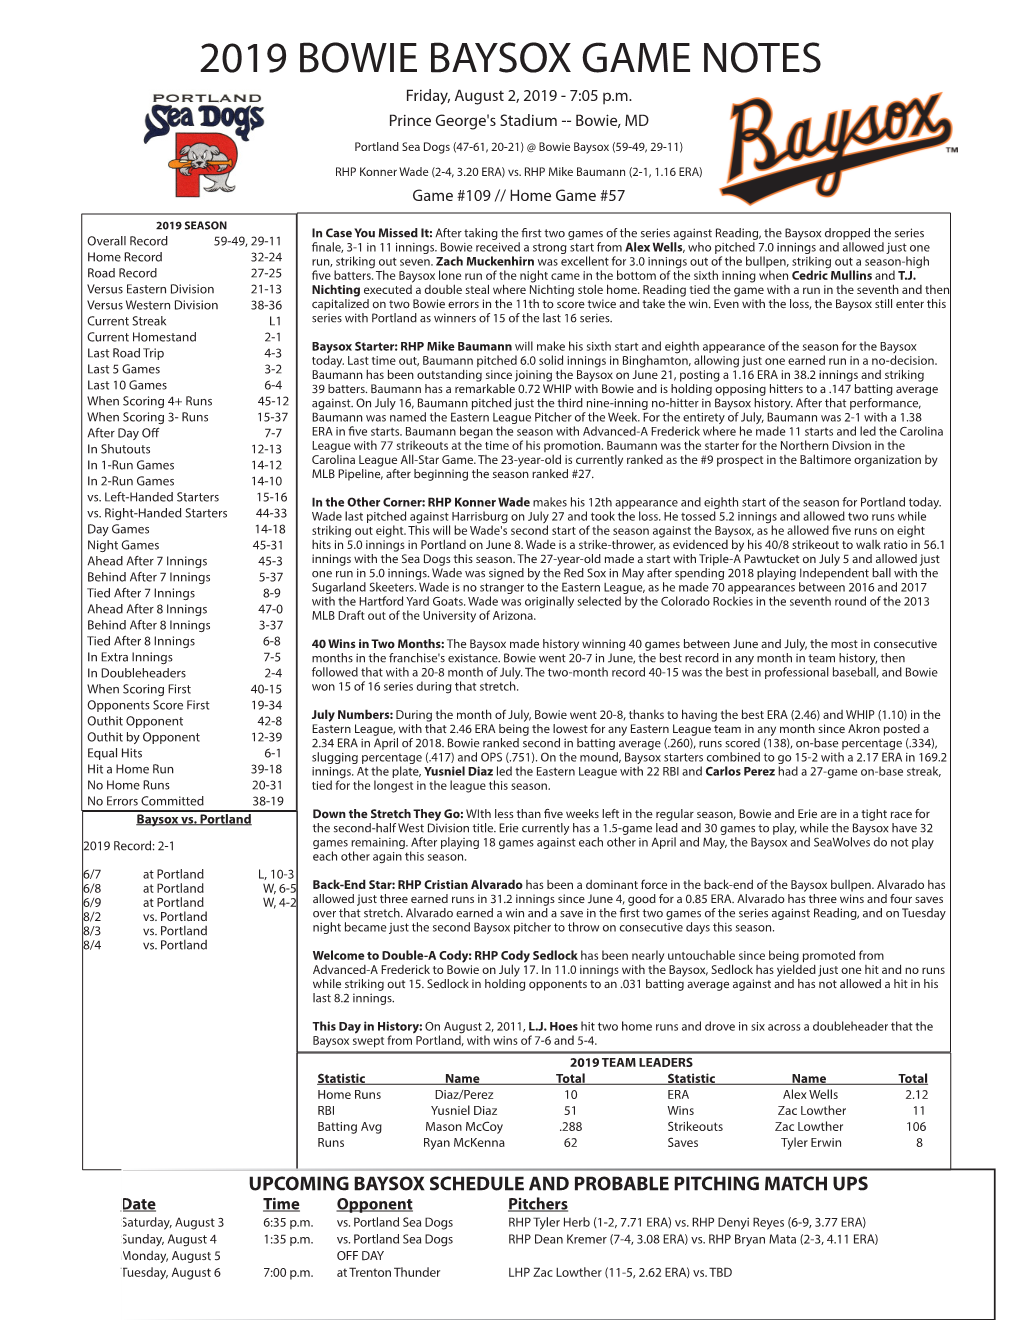 2019 BOWIE BAYSOX GAME NOTES Friday, August 2, 2019 - 7:05 P.M